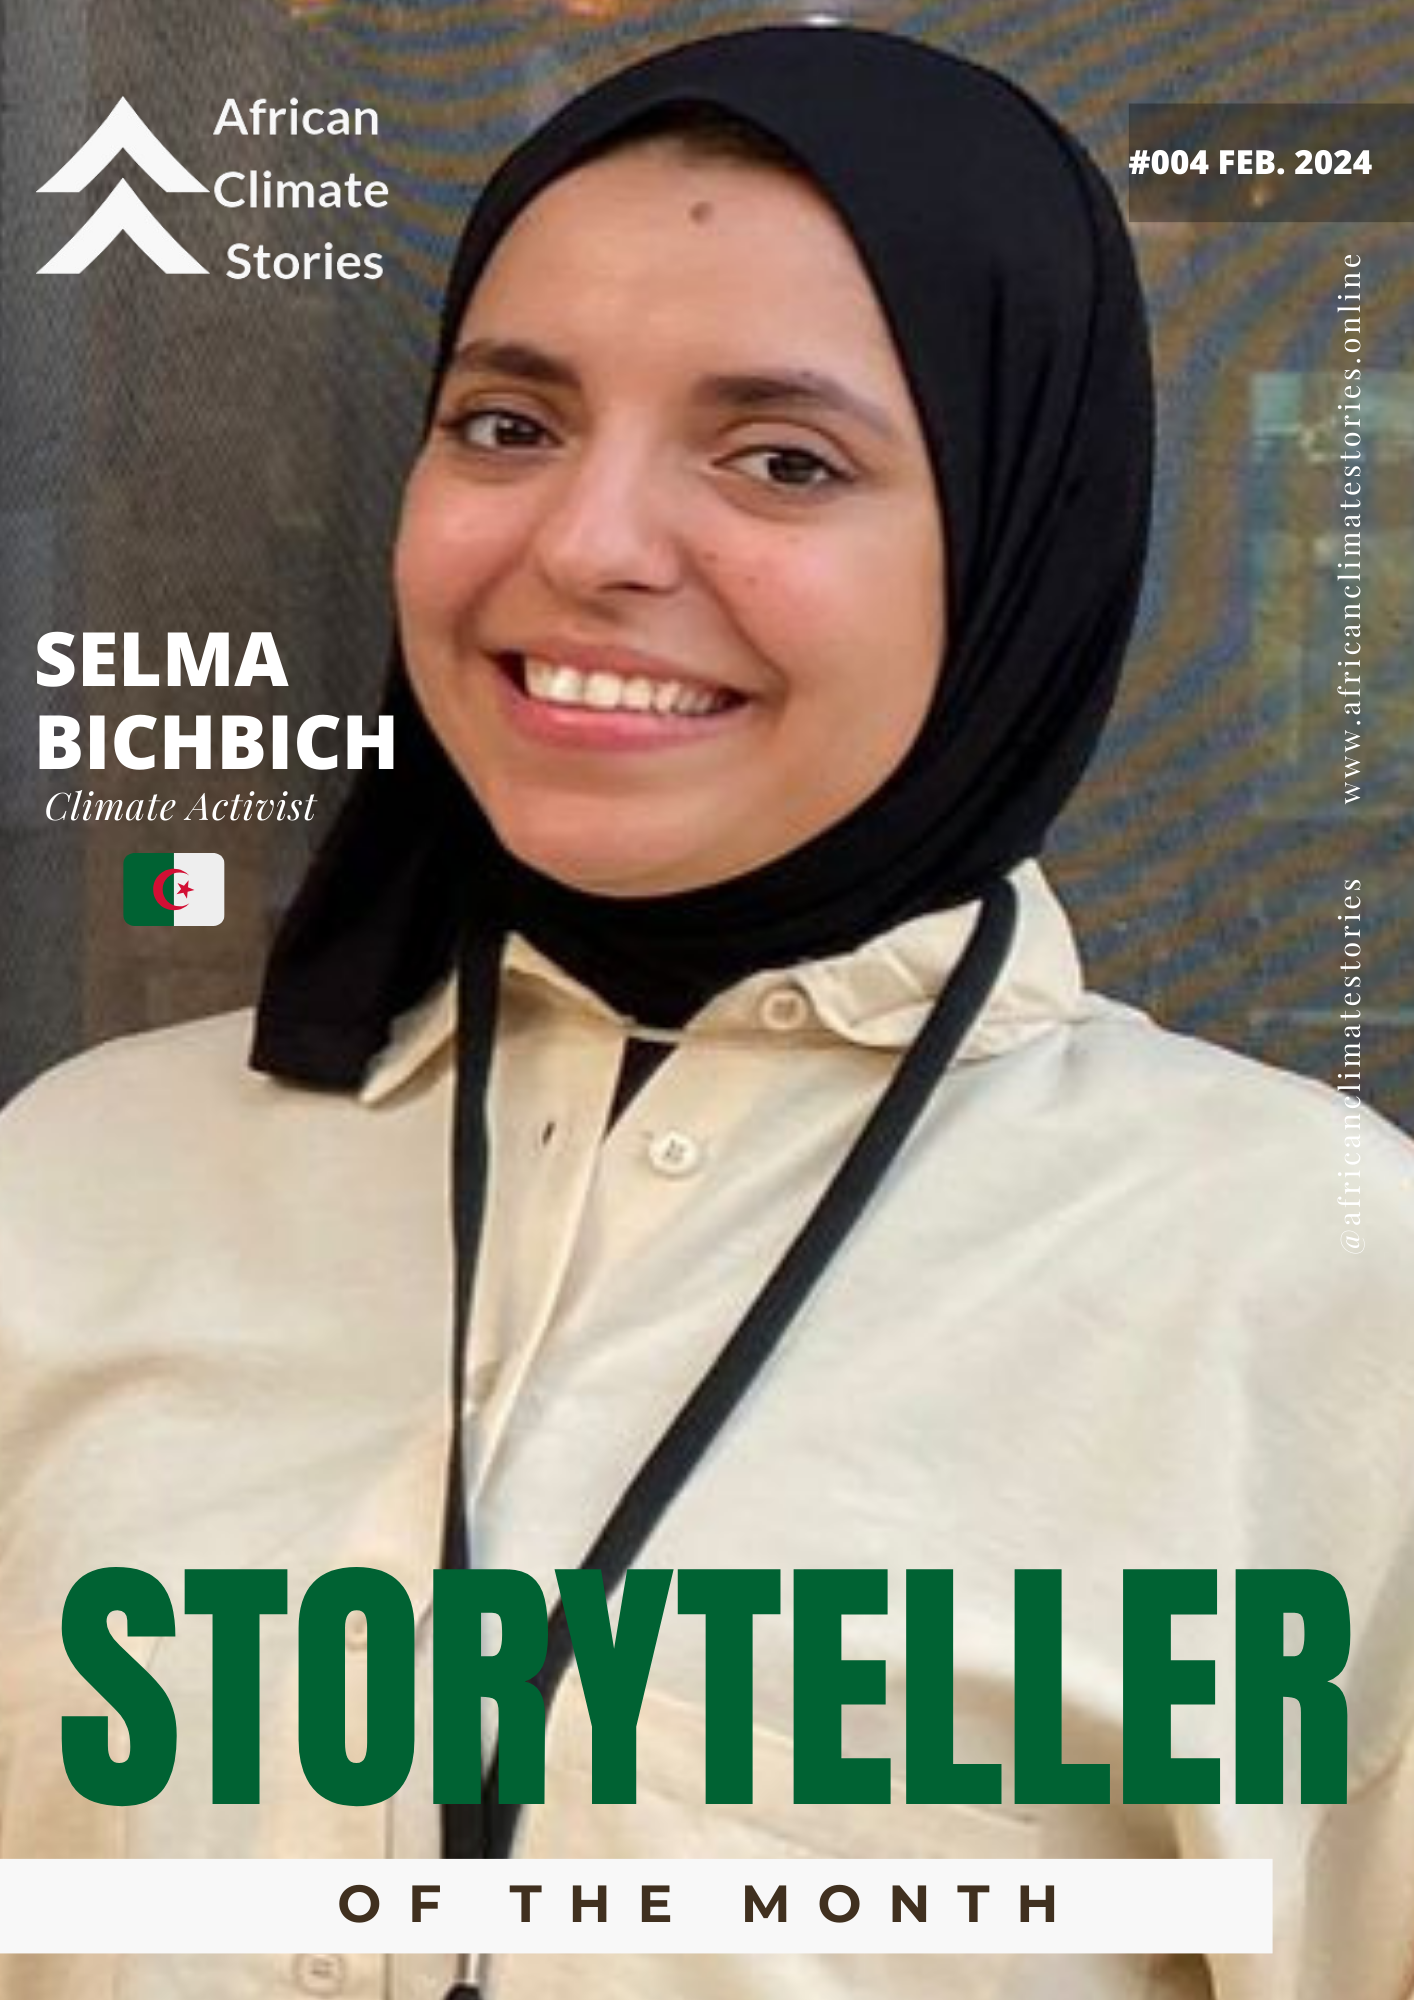 Selma Bichbich - African Climate Storyteller of the Month.